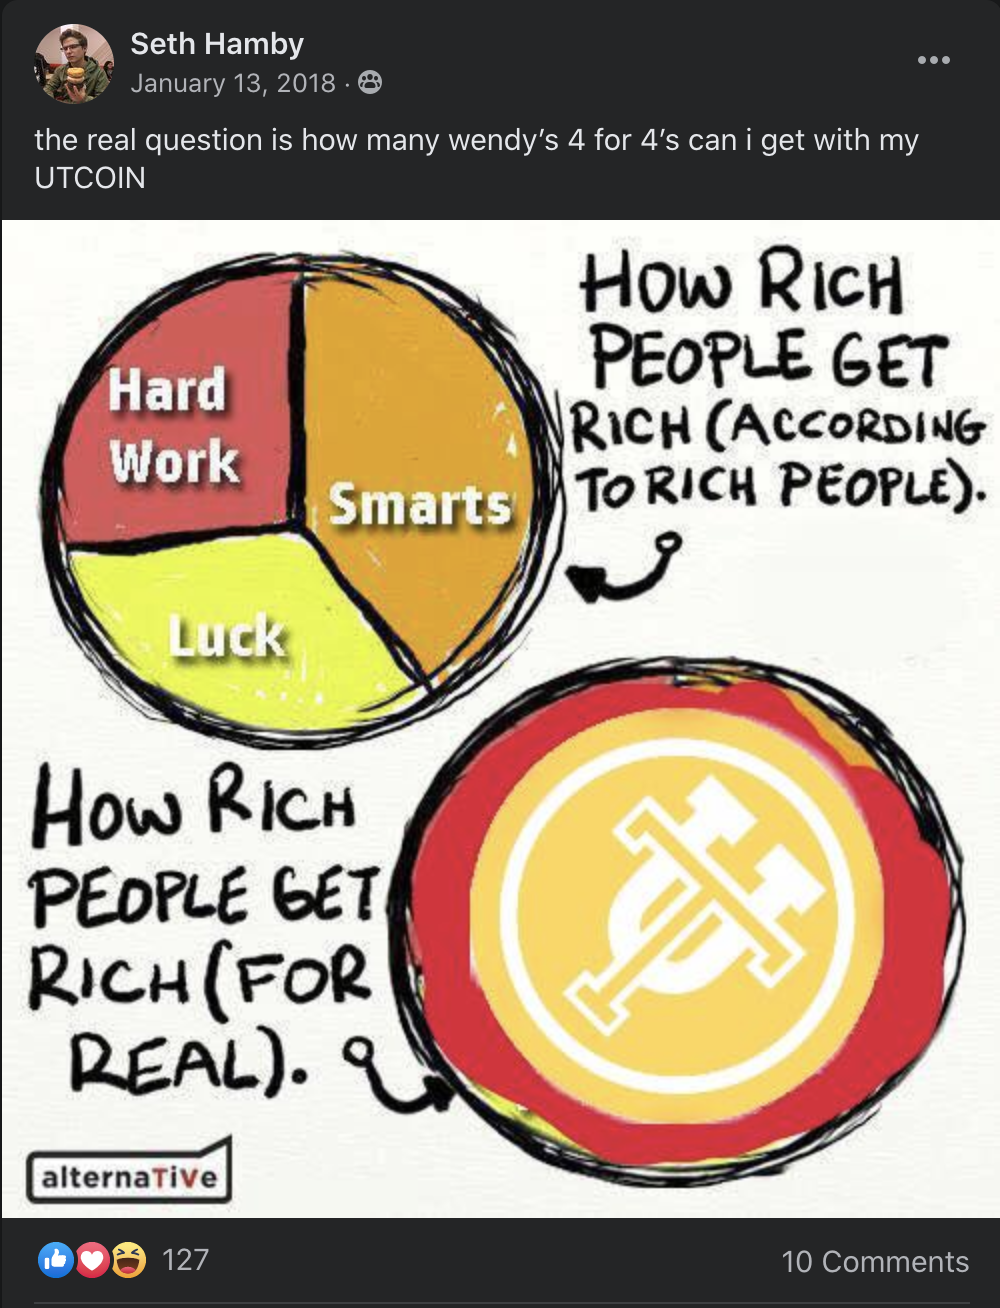 Meme showing that UTCoin is how people really get rich